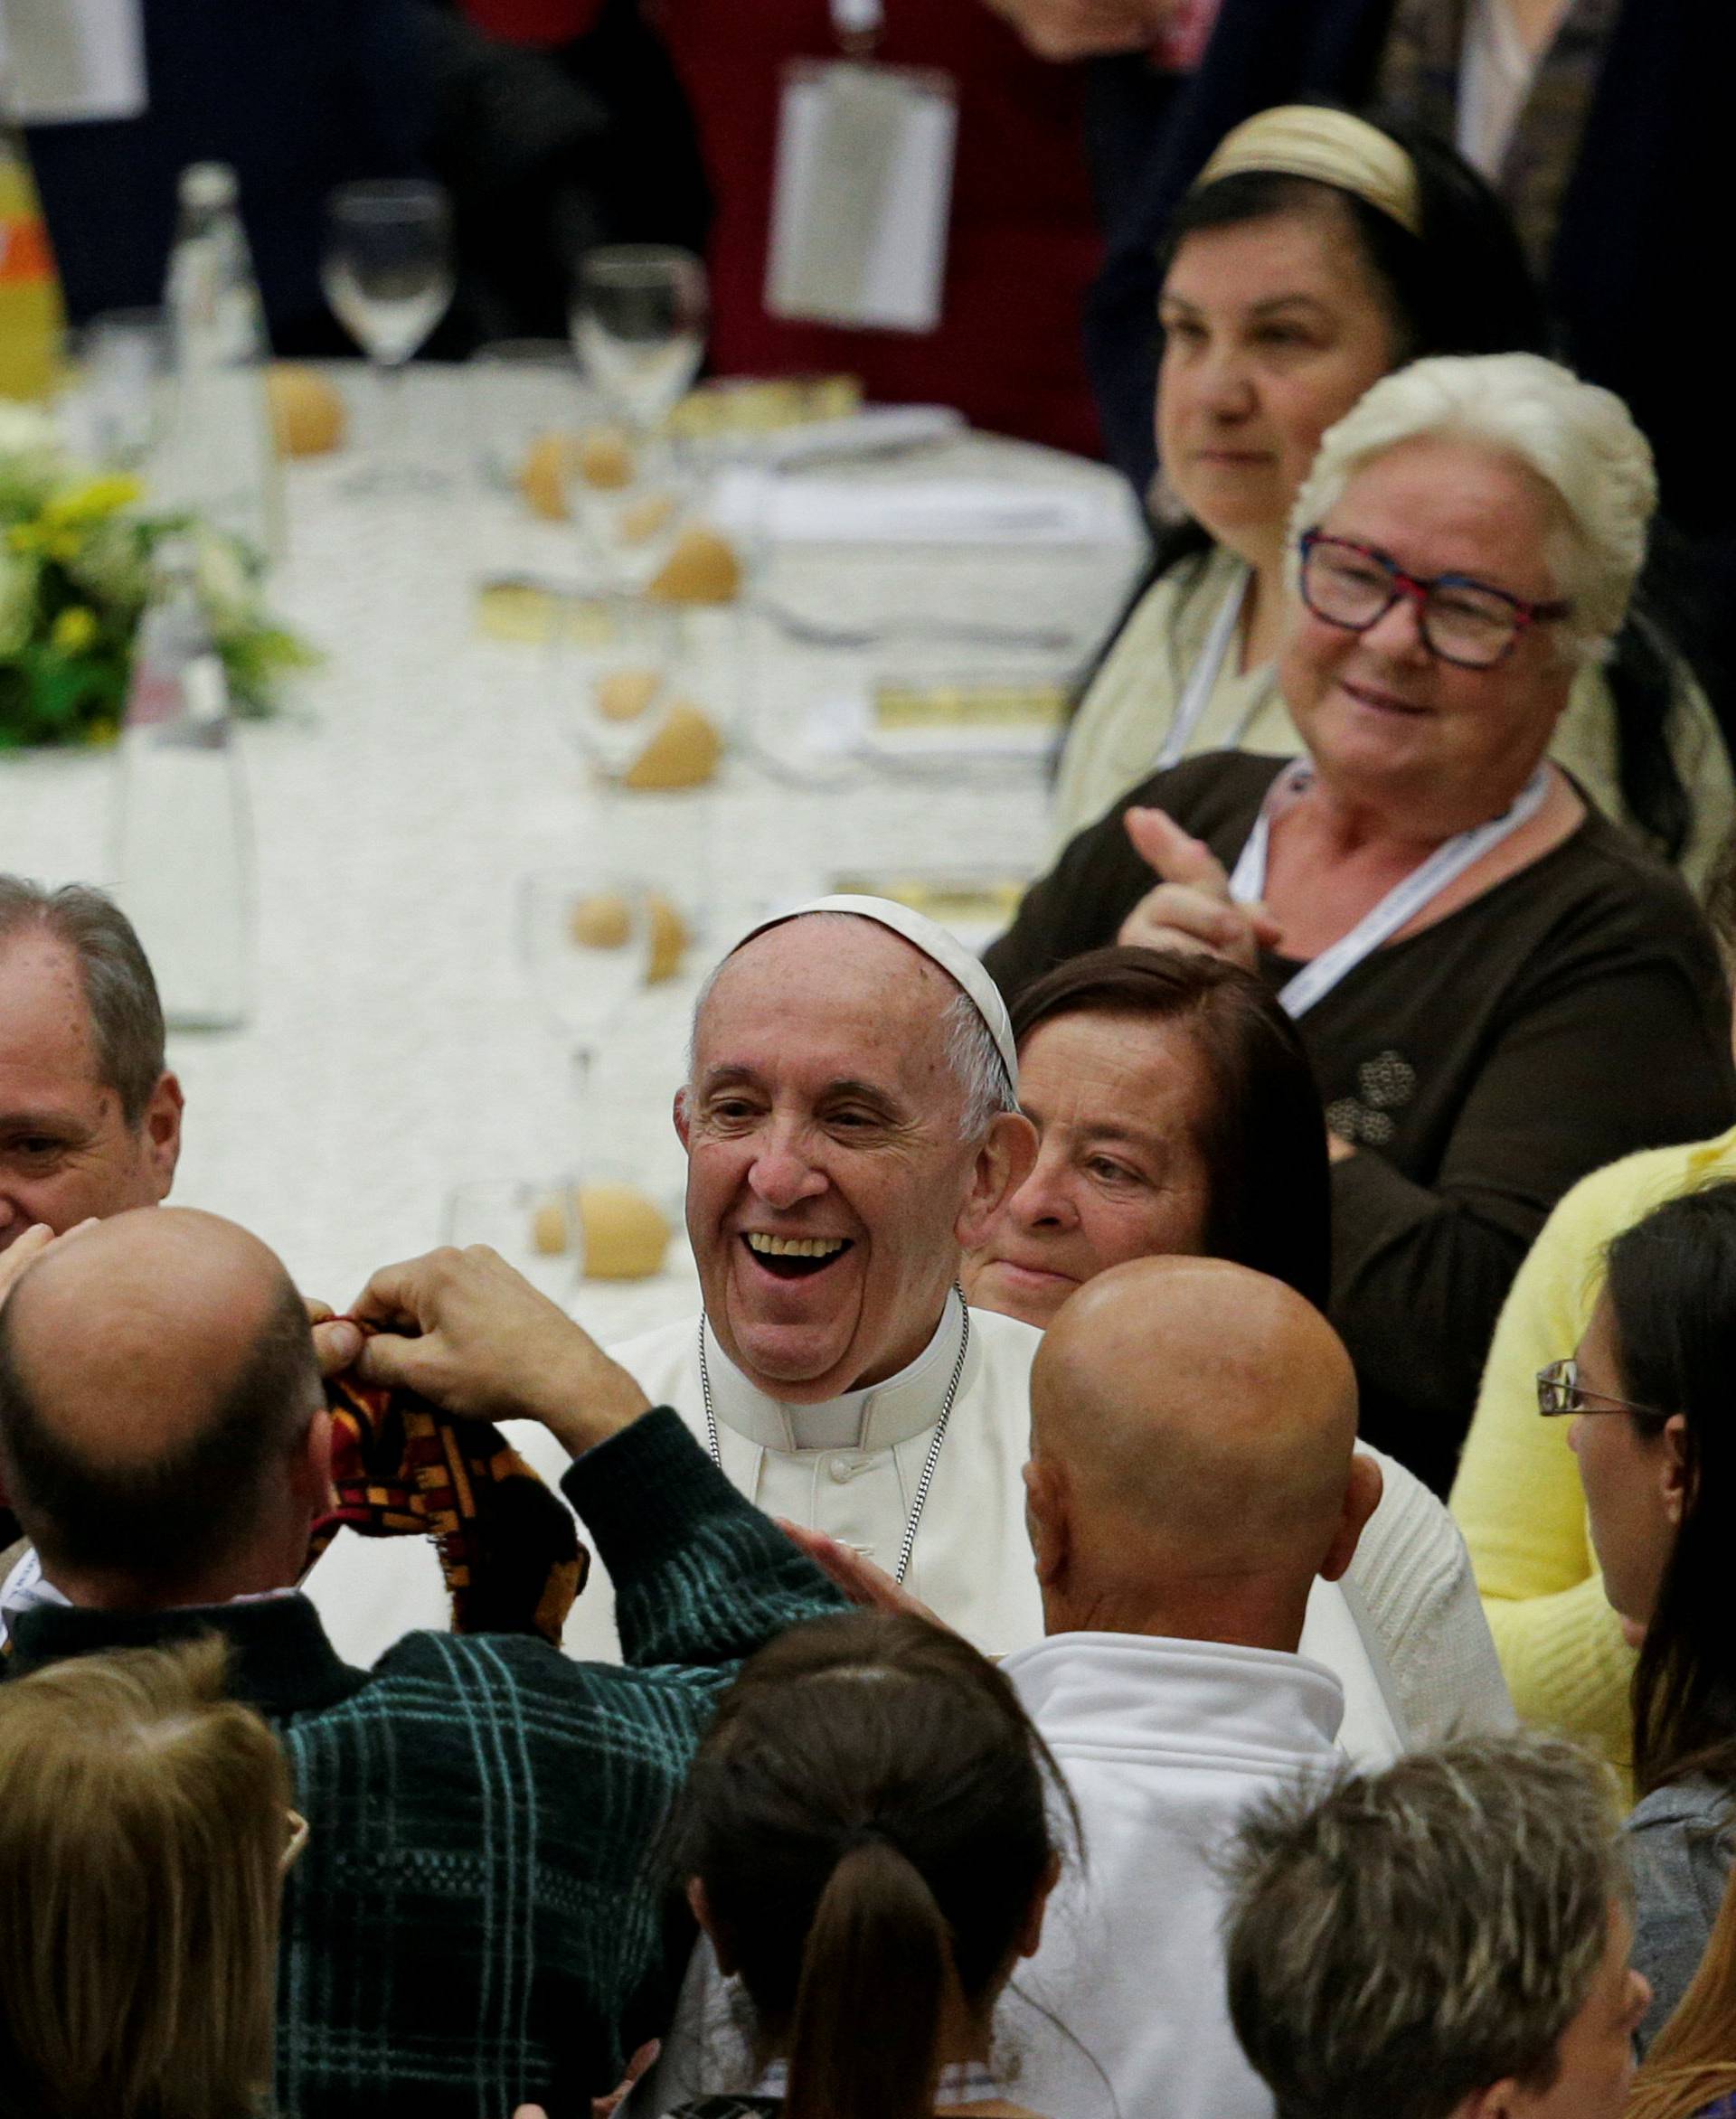 Pope Francis smiles before sharing a lunch with the poor following a special mass to mark the new World Day of the Poor in Paul VI's hall at the Vatican